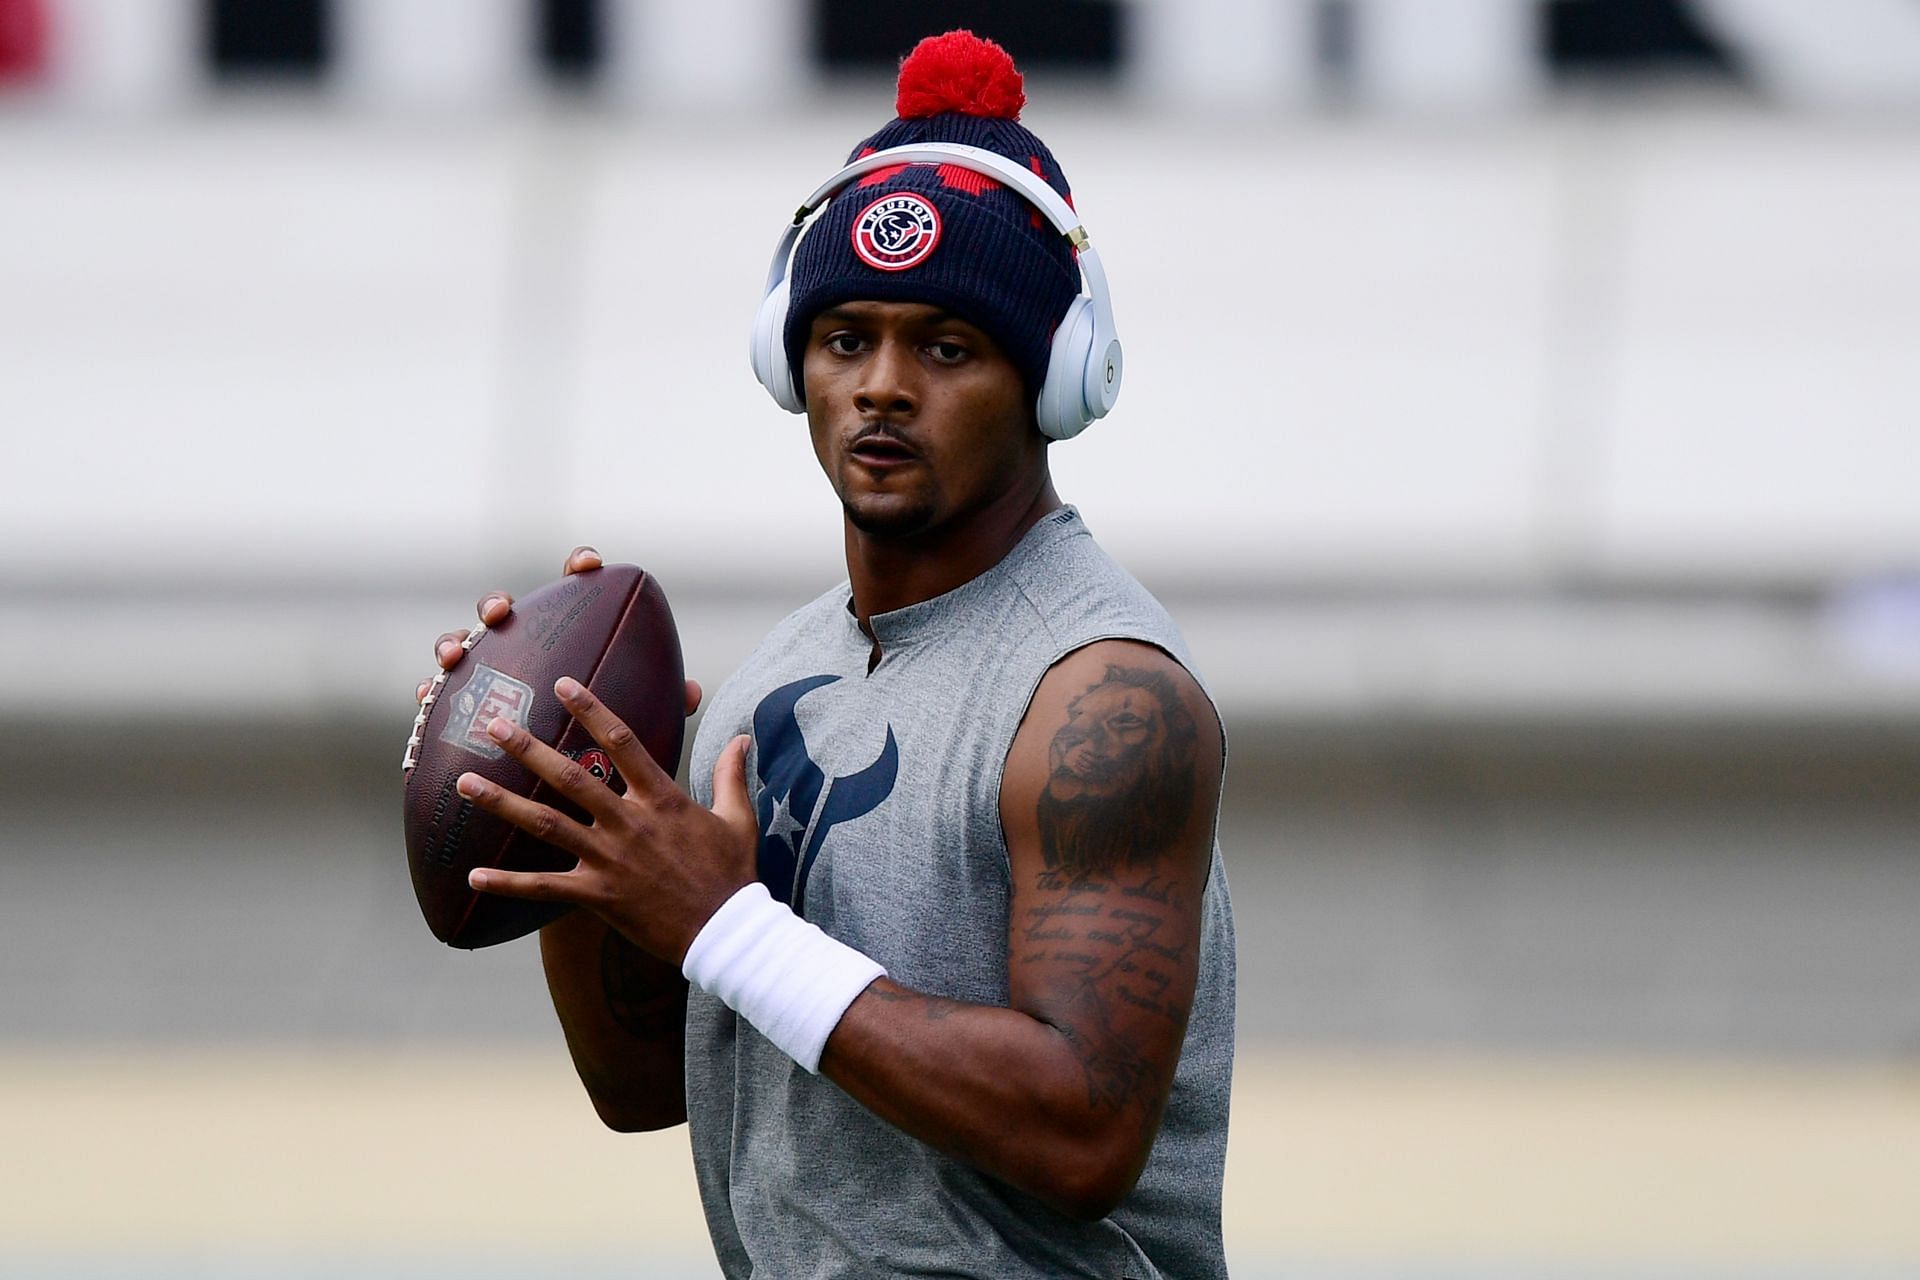 Deshaun Watson is facing serious accusations from 24 alleged victims